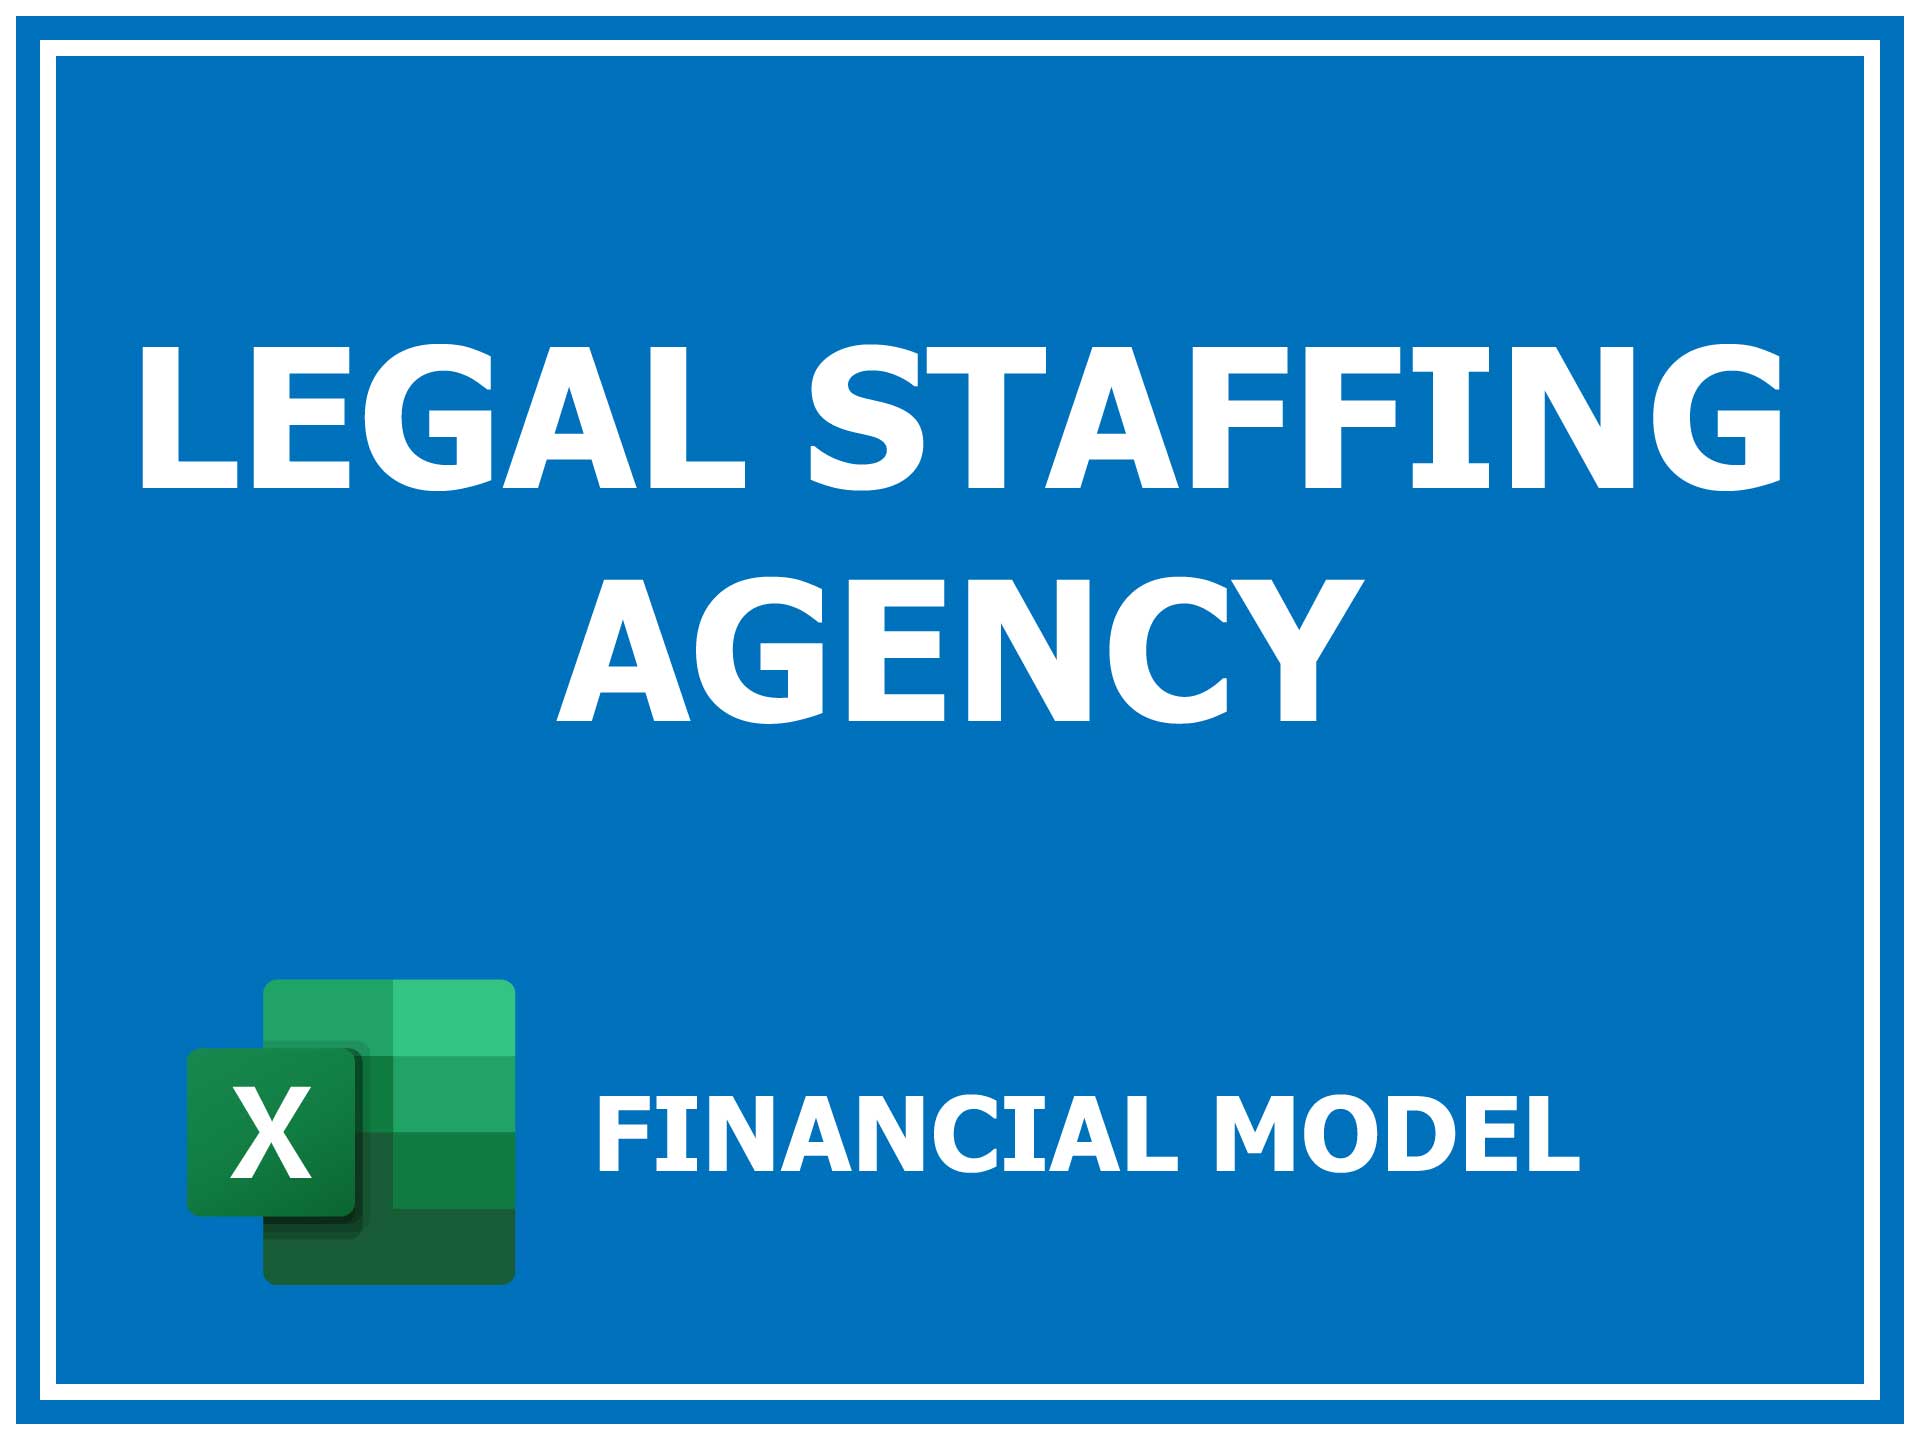 Legal Staffing Agency